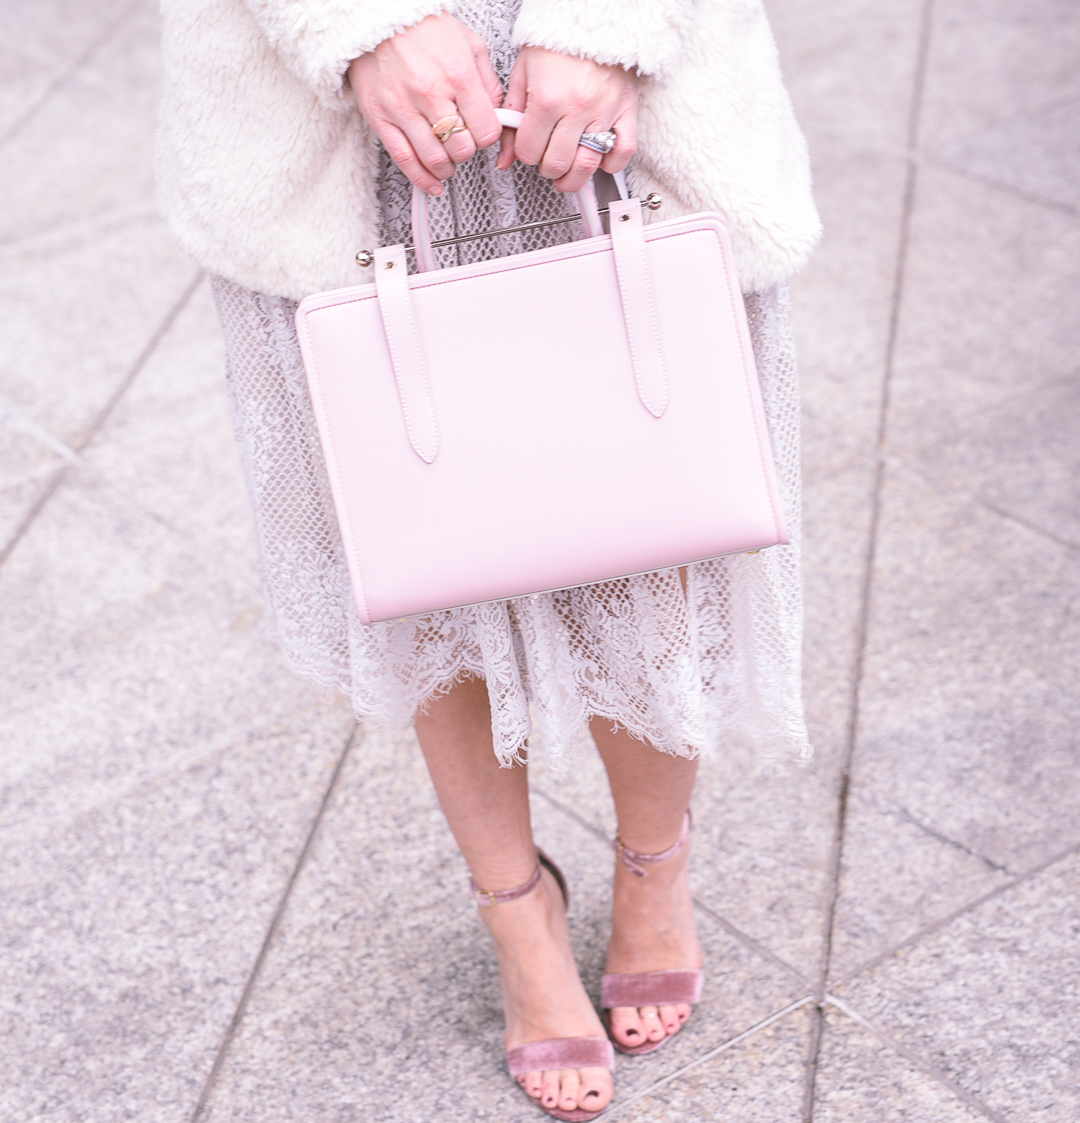 Blush pink tote bag with velvet strappy sandals. 